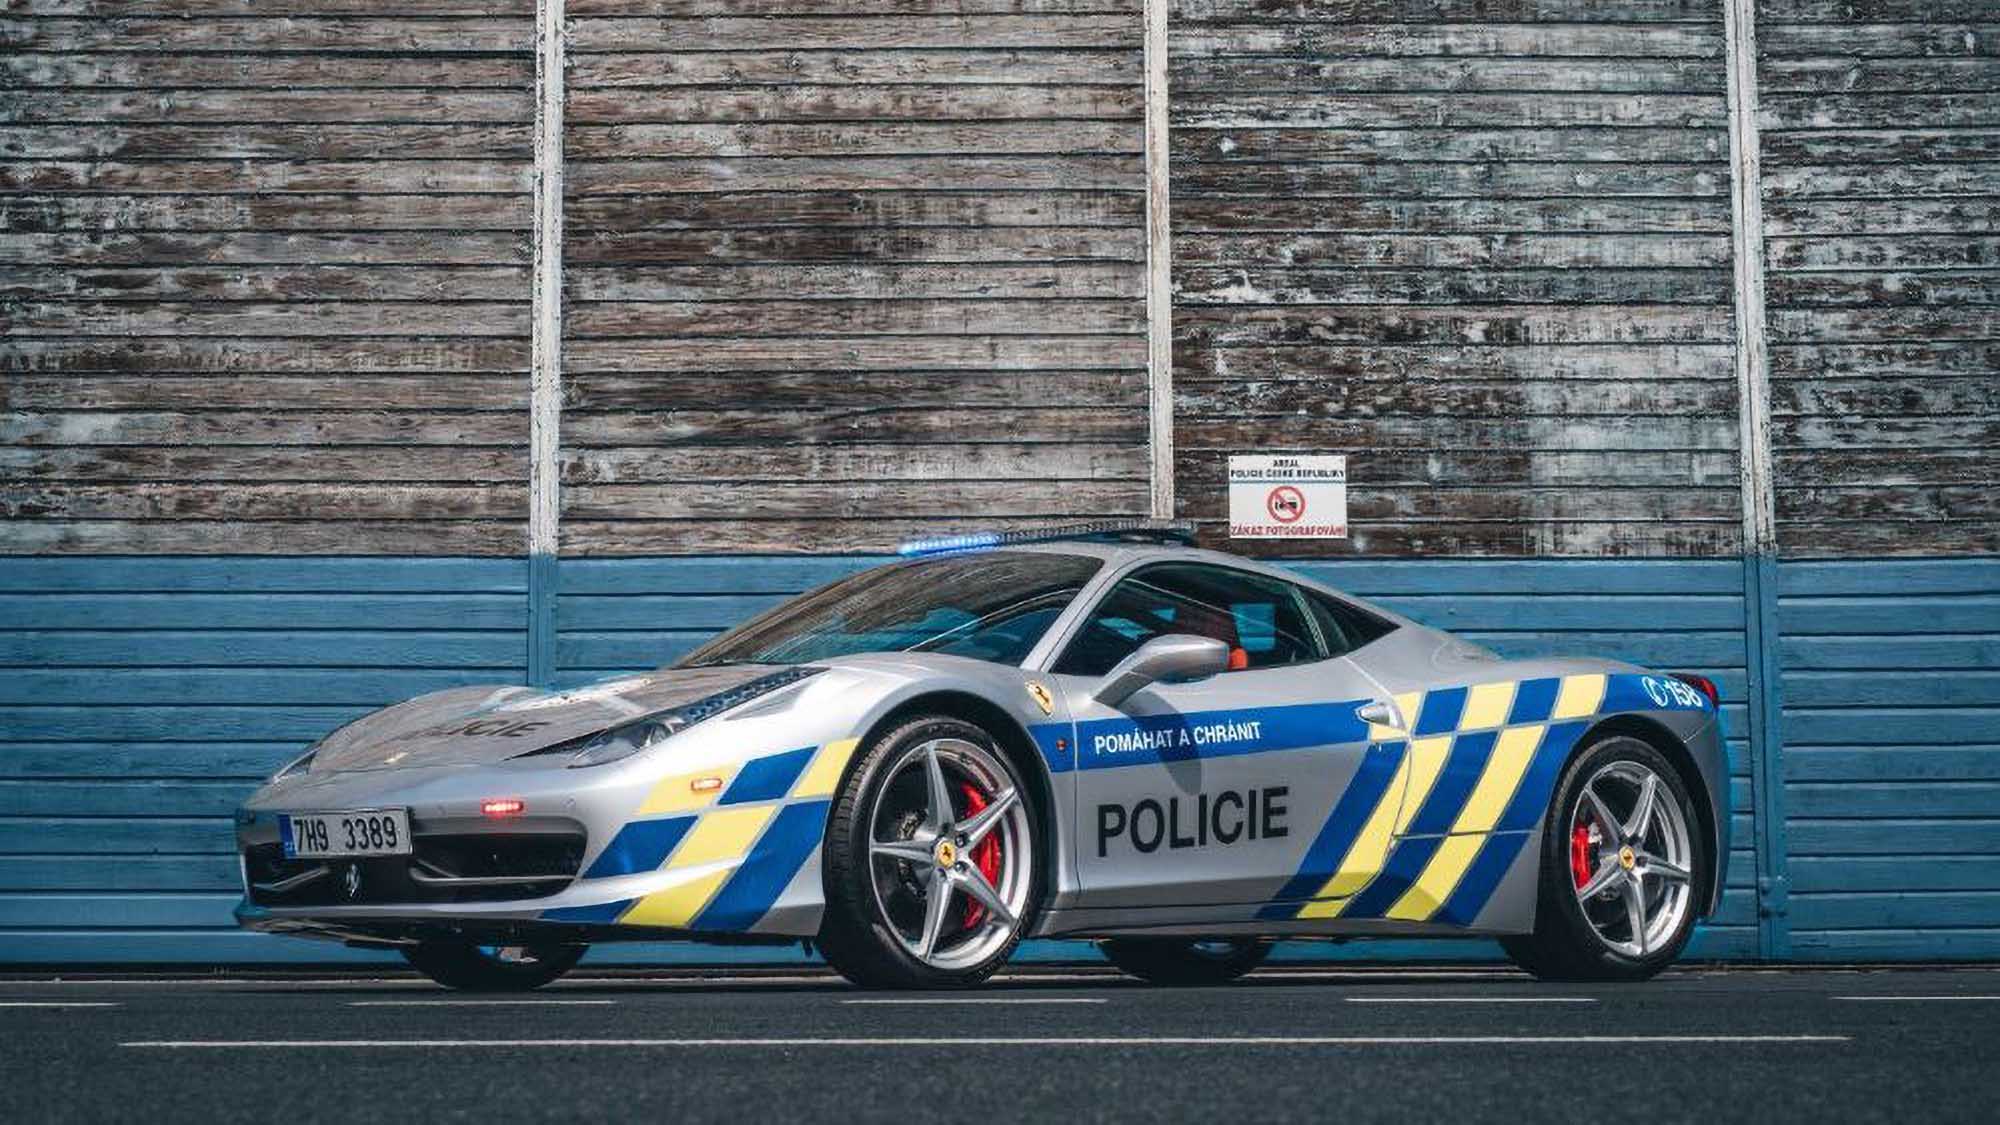 Read more about the article Crooks On Notice As Police Convert 202MPH Ferrari To Cop Car